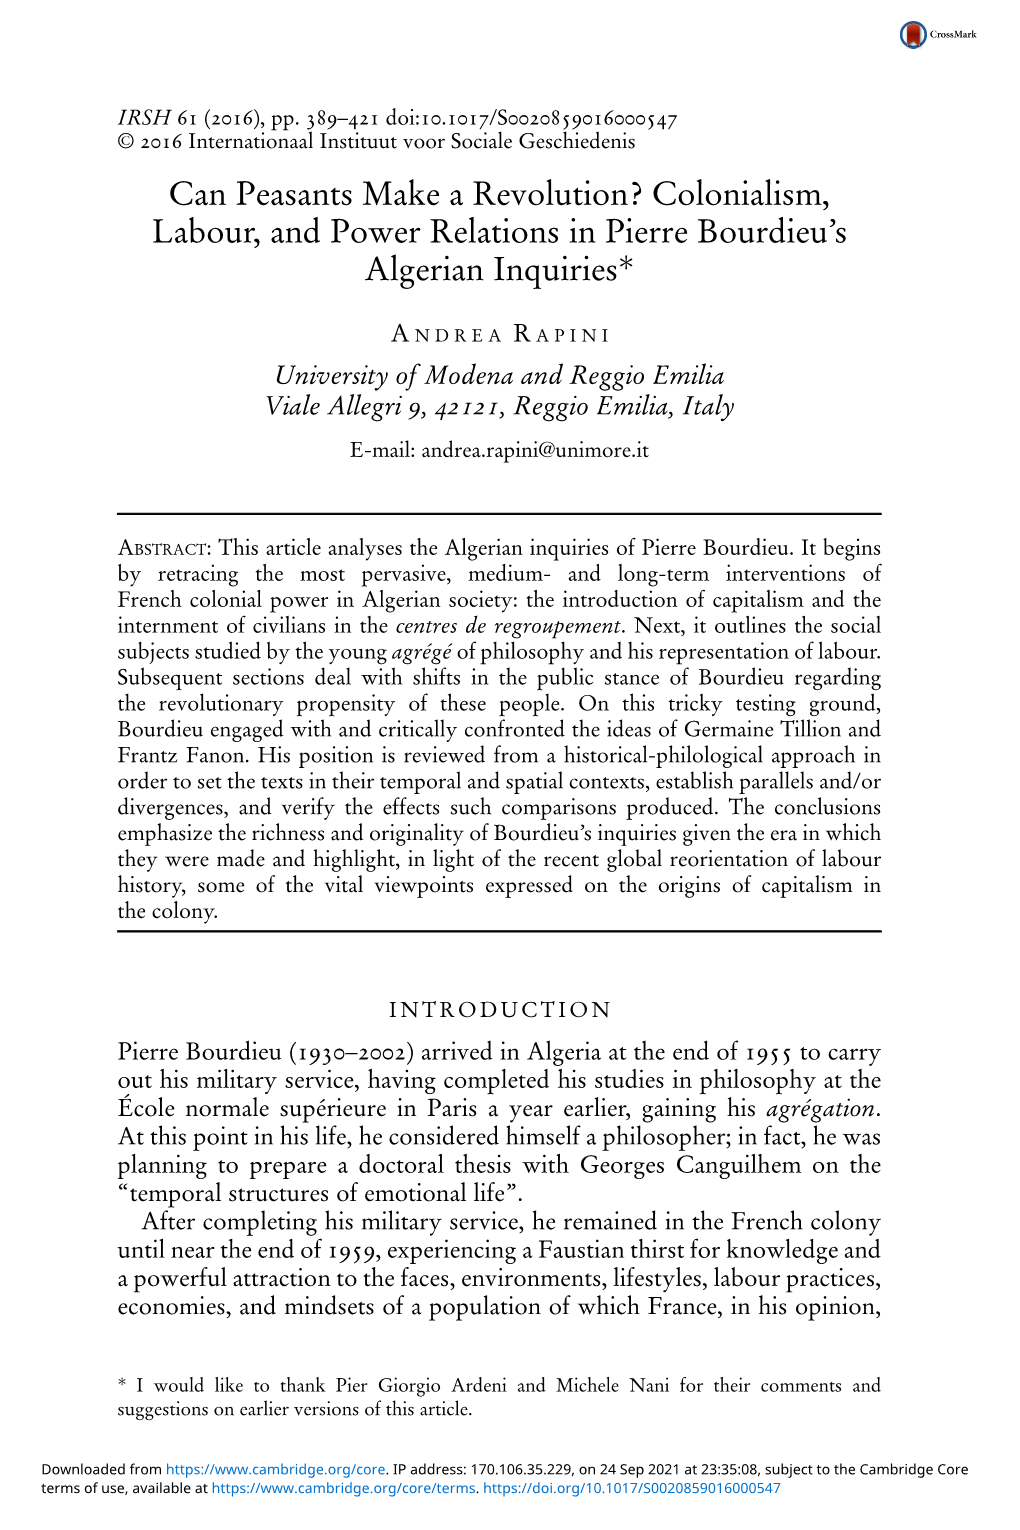 Can Peasants Make a Revolution? Colonialism, Labour, and Power Relations in Pierre Bourdieu’S Algerian Inquiries*